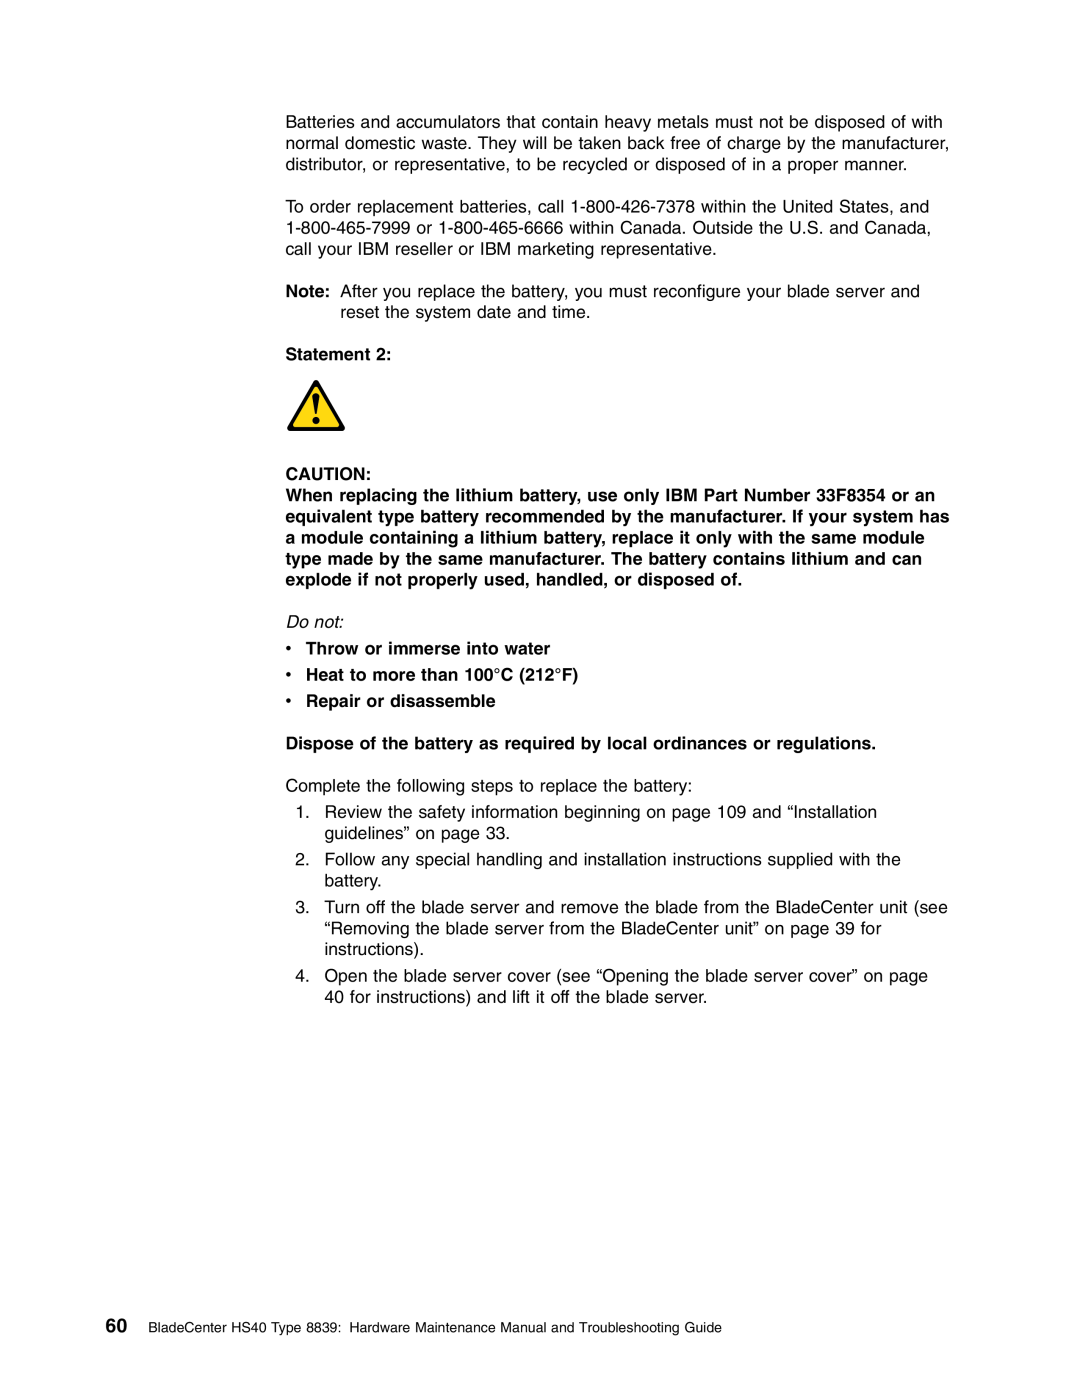 IBM HS40 manual Do not, v Throw or immerse into water v Heat to more than 100C 212F, v Repair or disassemble, Statement 